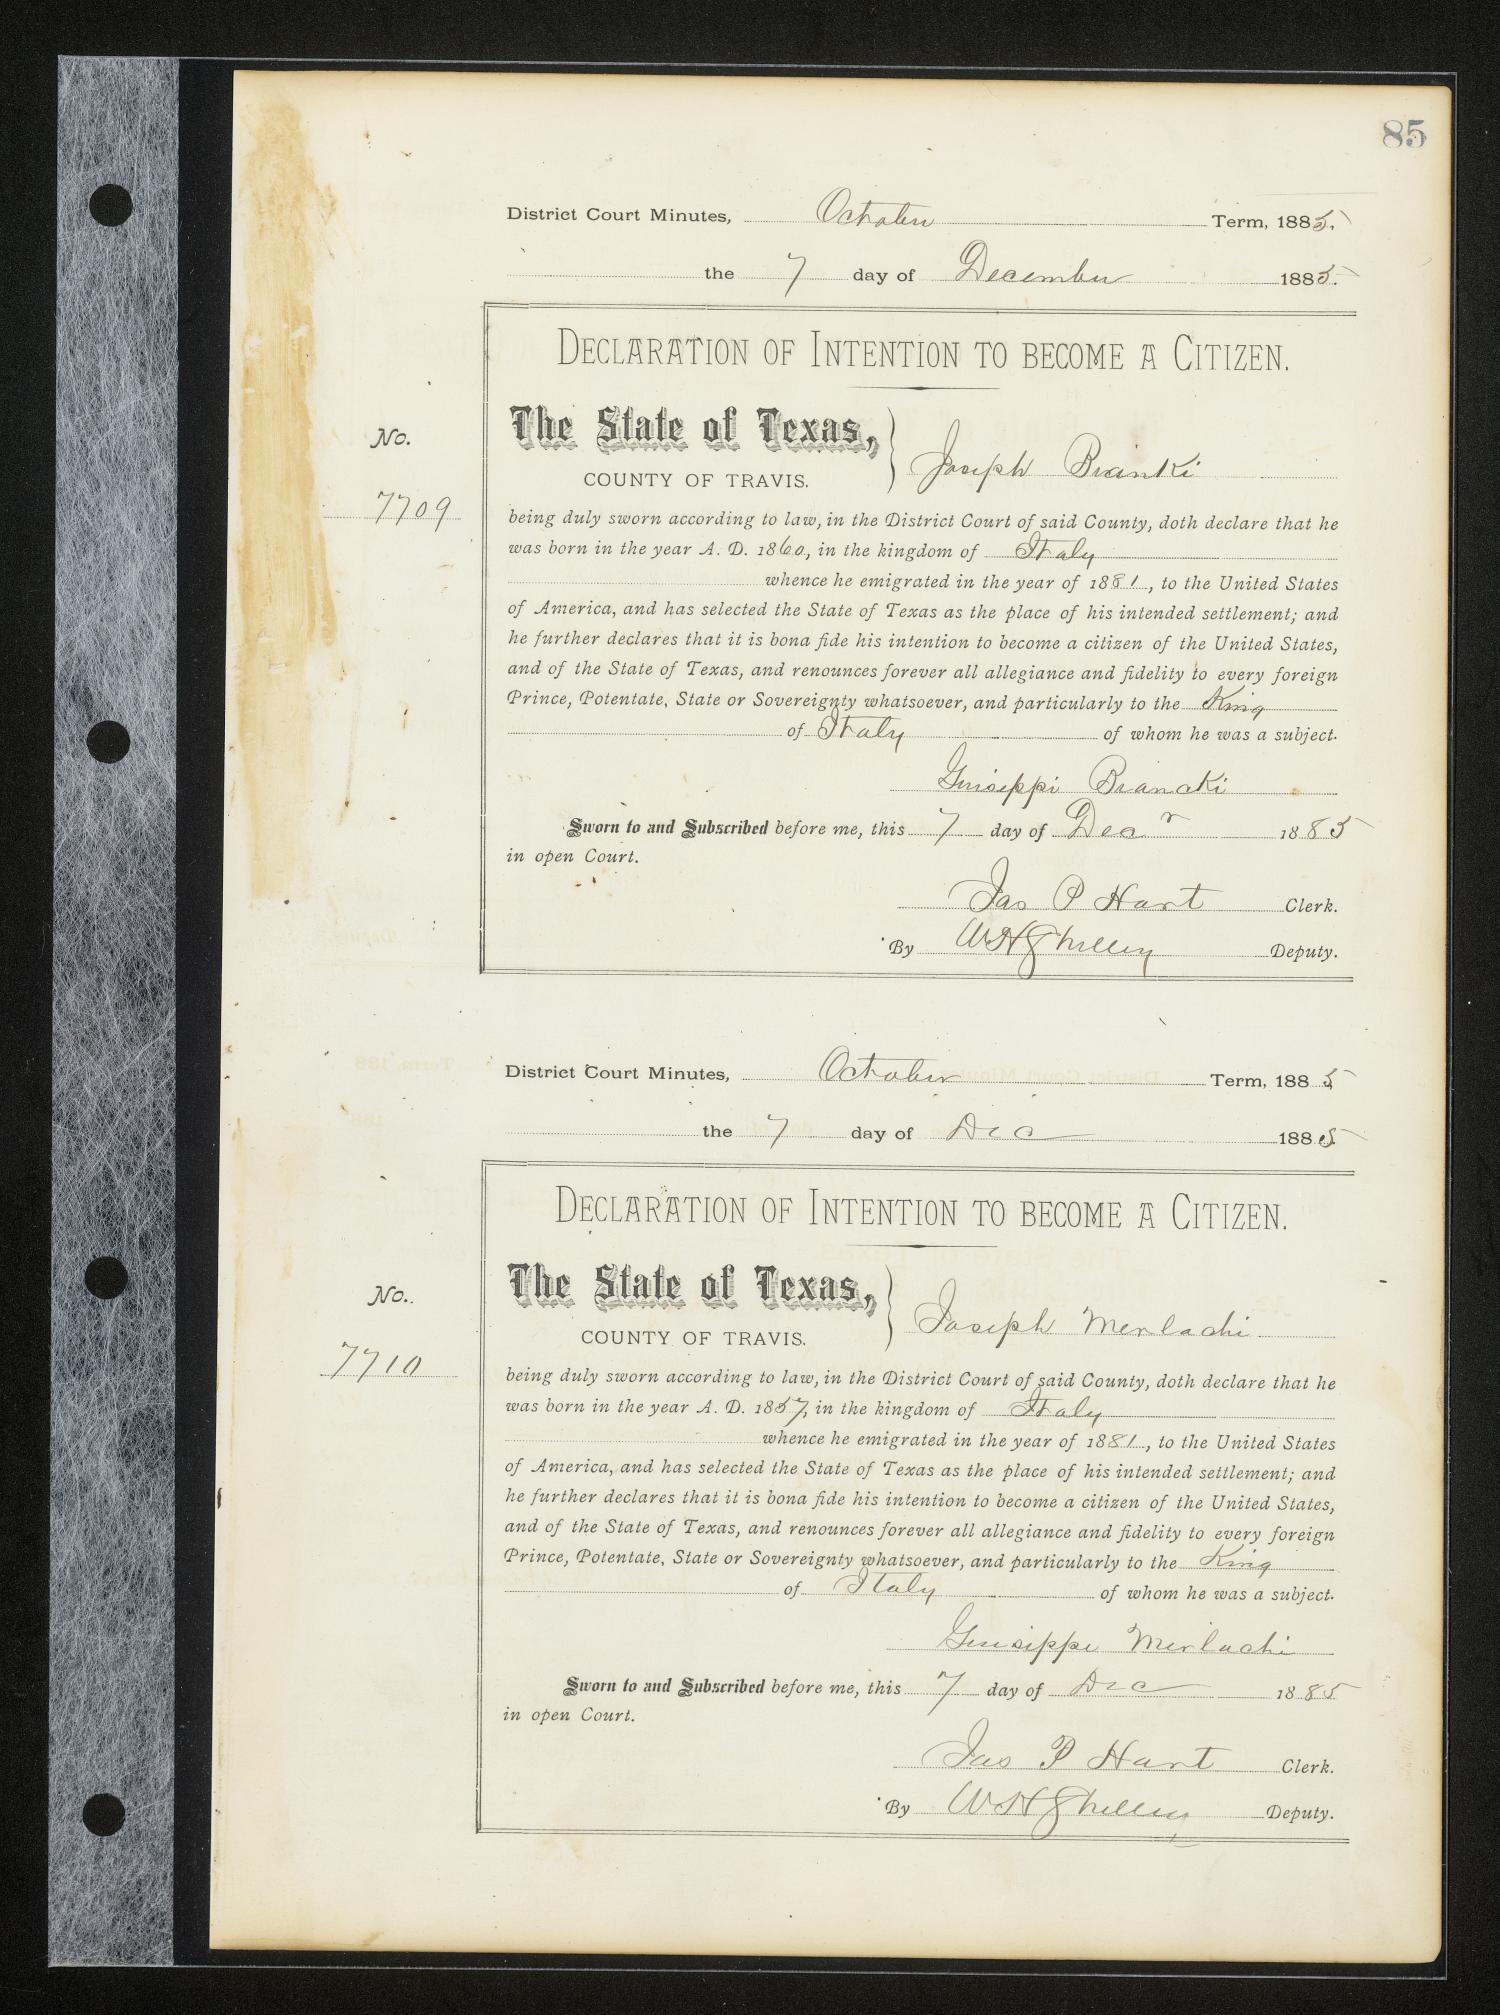 Travis County Naturalization Records: Declaration Minutes A, pages 1-208
                                                
                                                    85
                                                